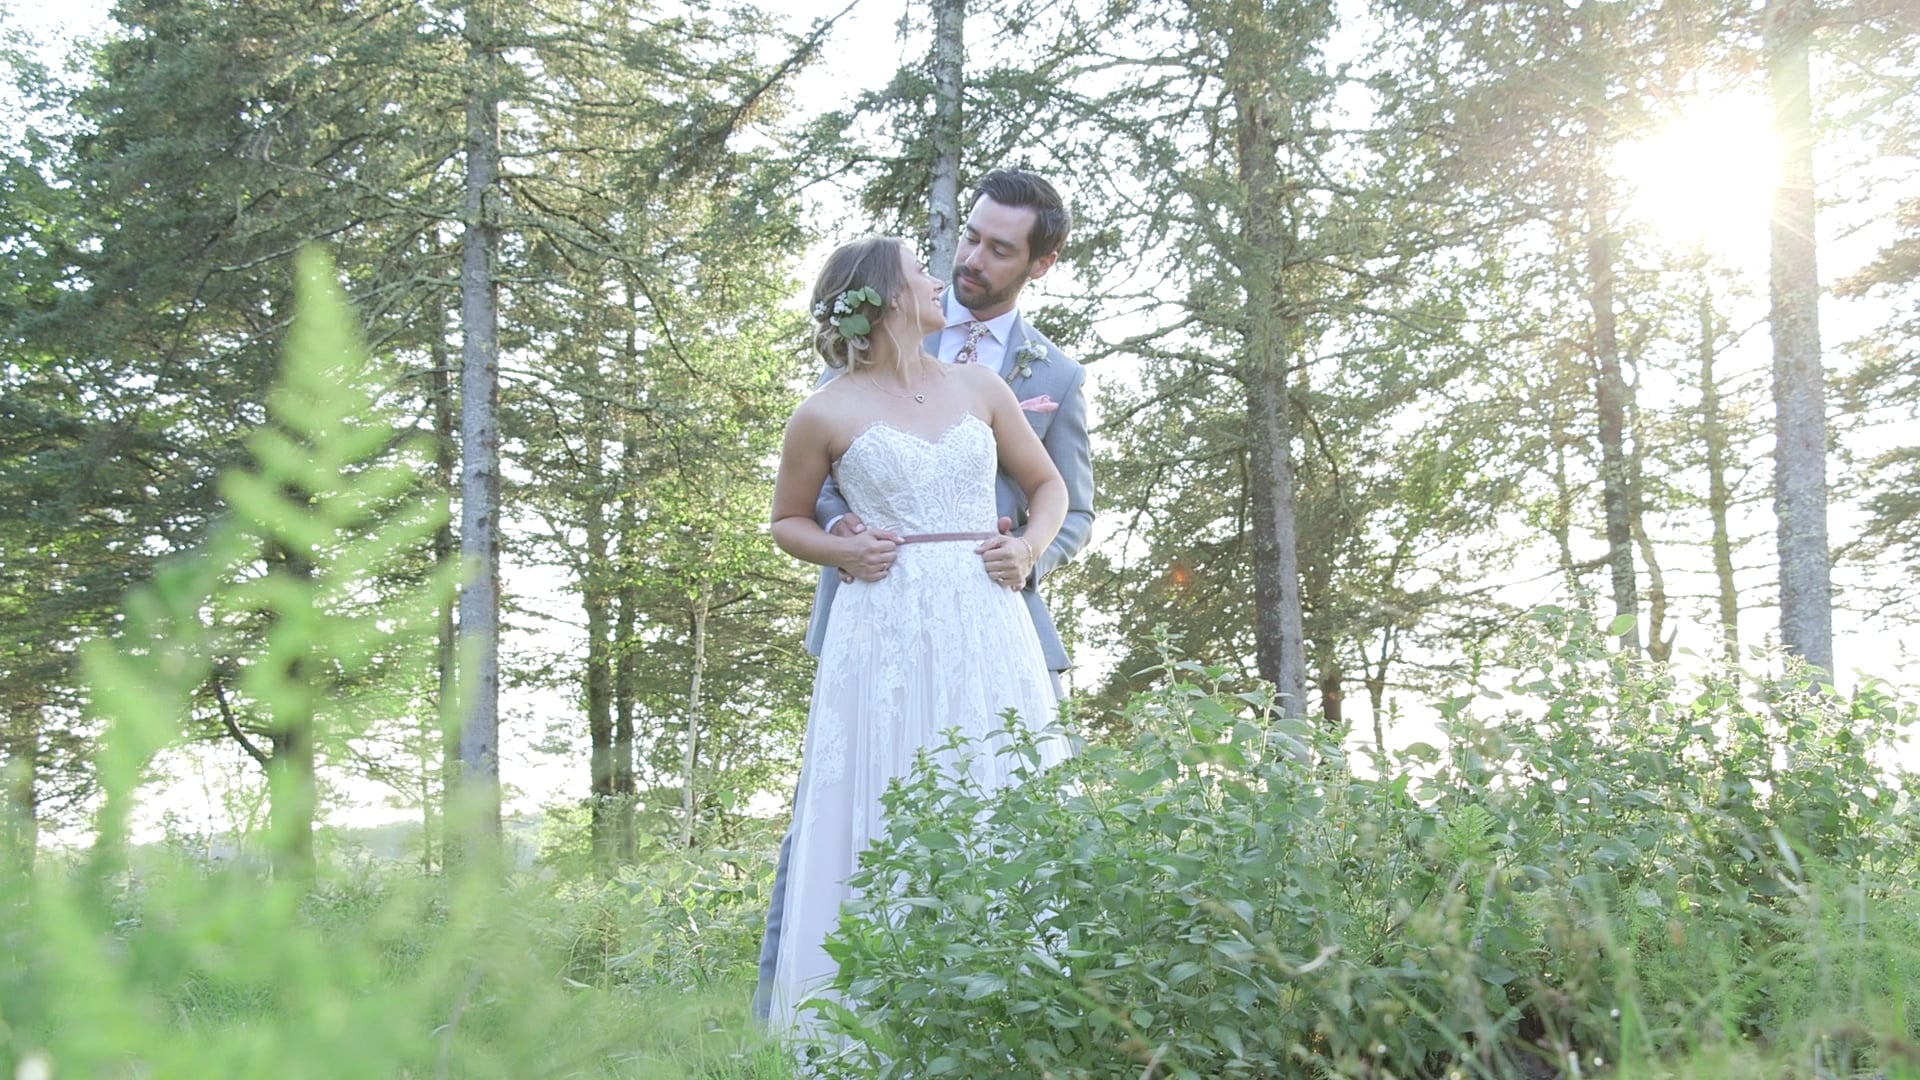 Jessica and Alan from Lamoine, Maine